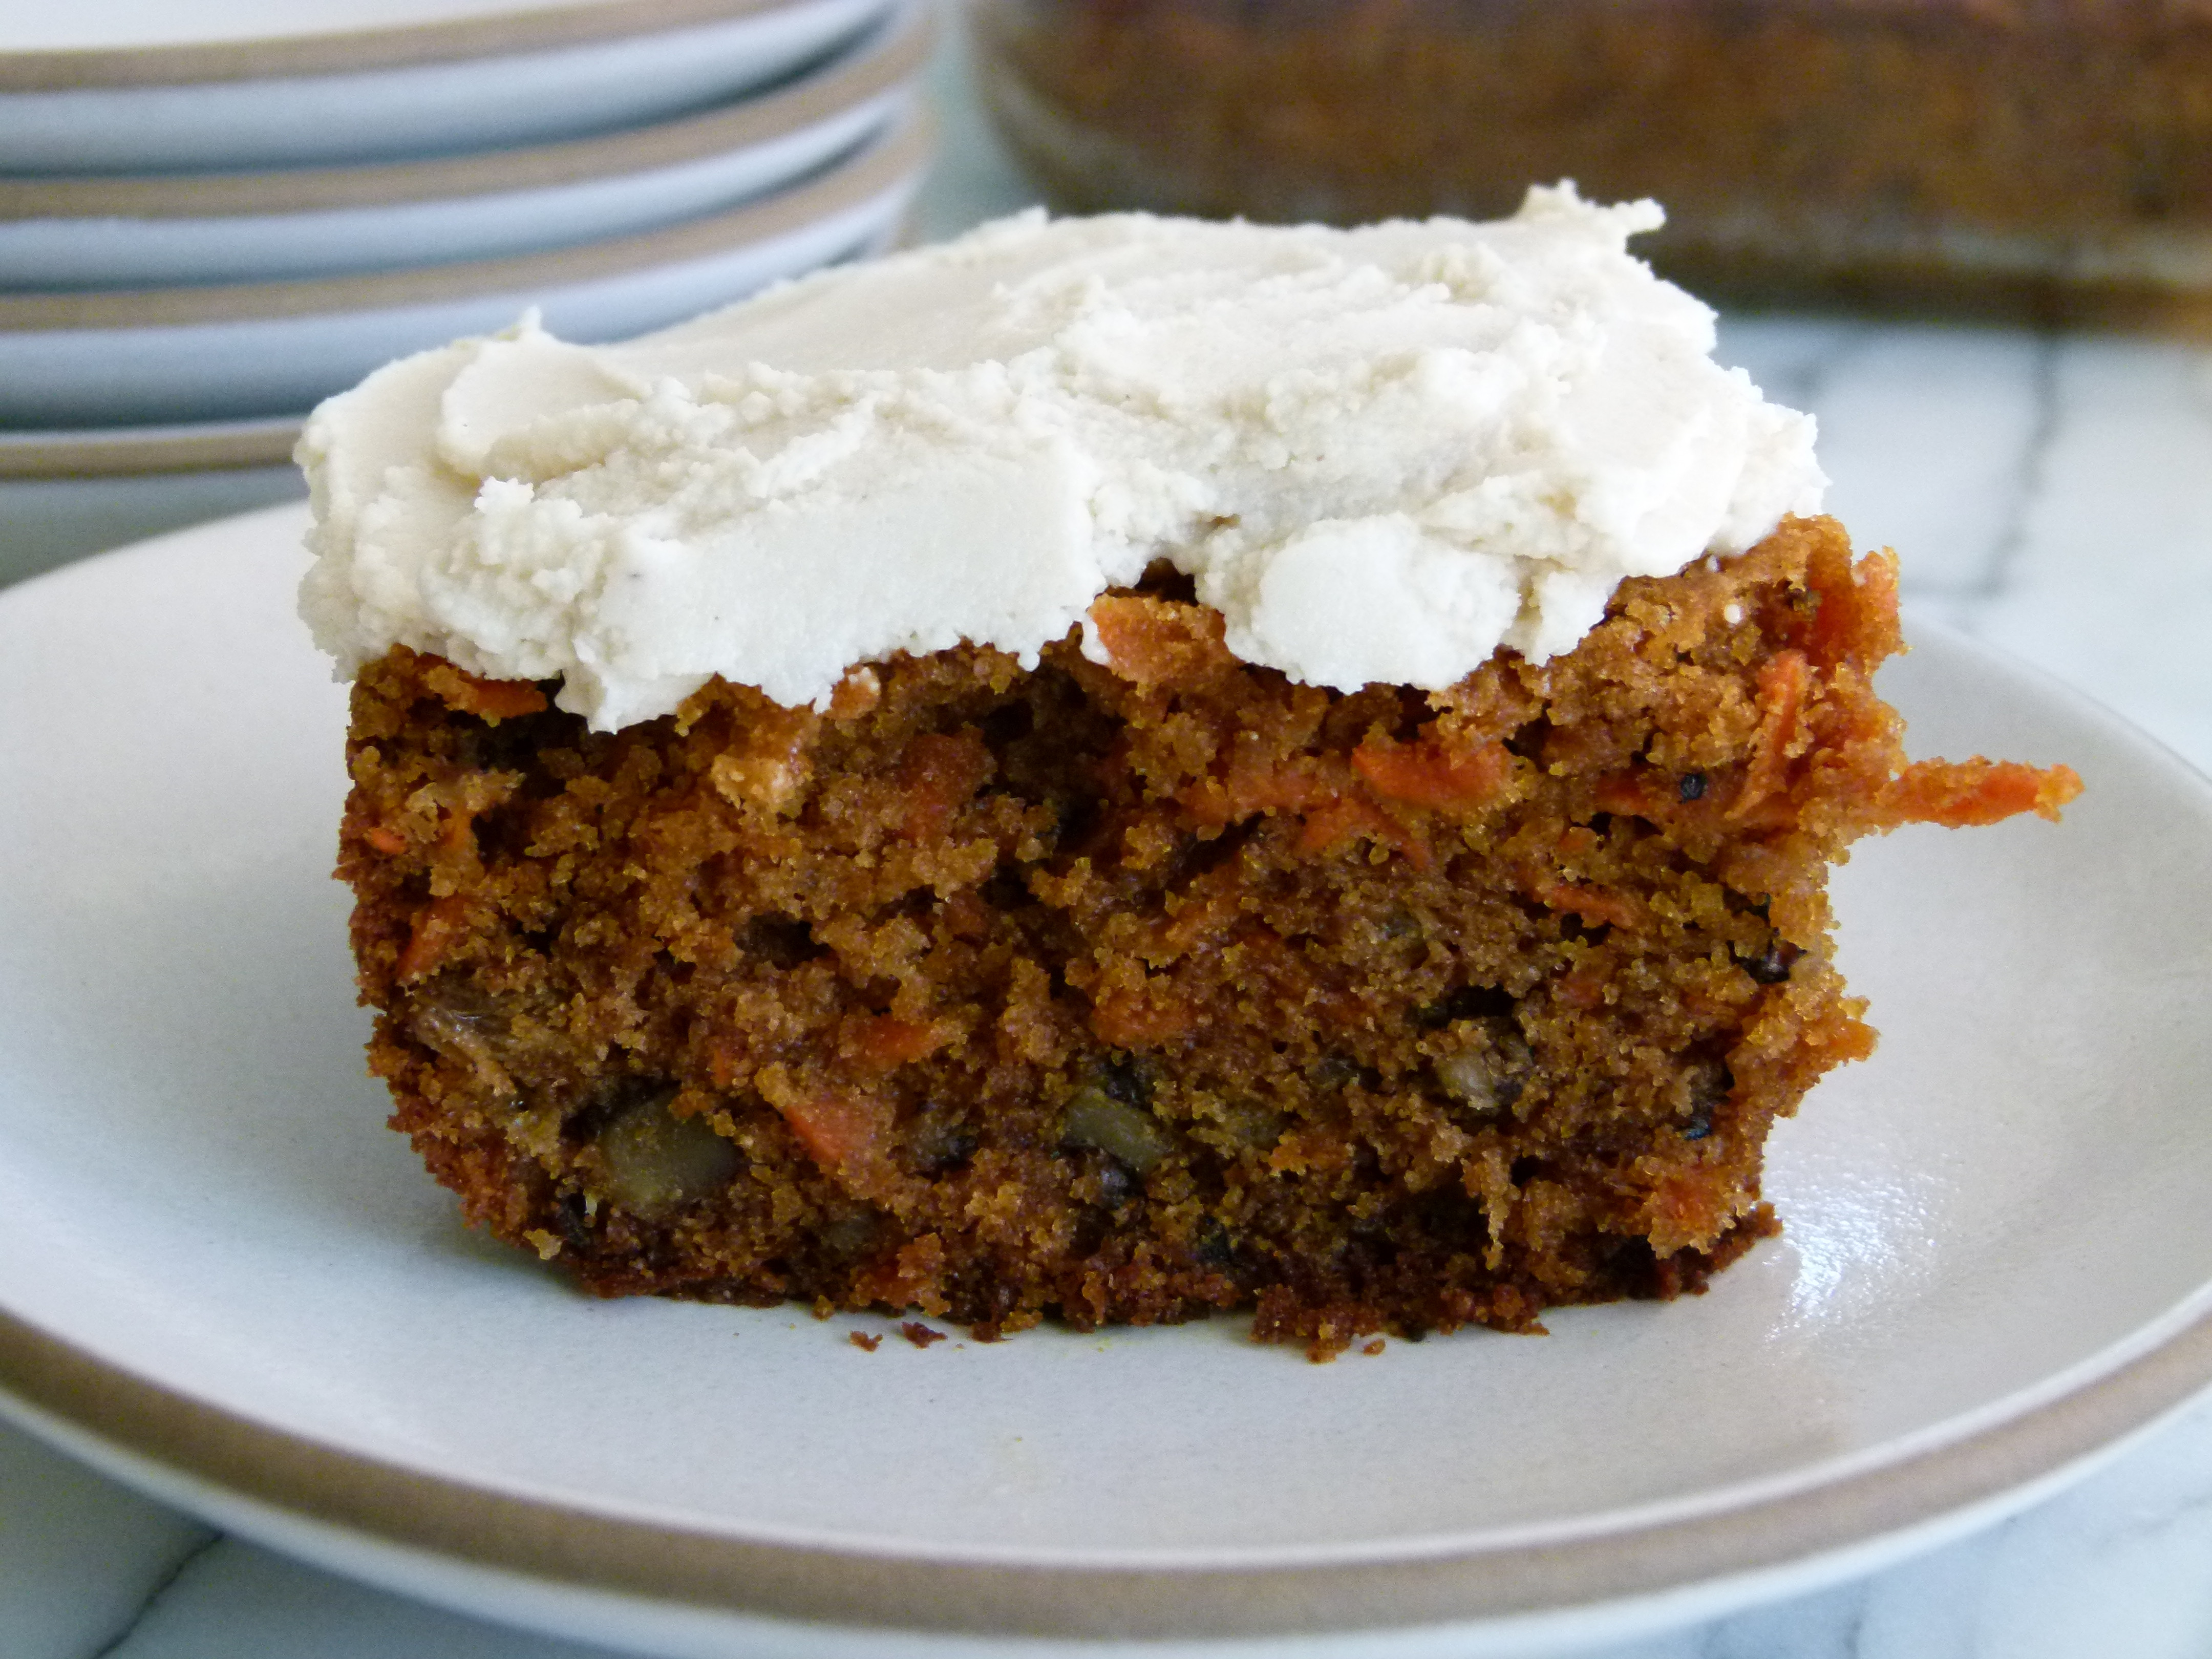 Dairy Free Carrot Cake Whole Wheat Carrot Cake with Dairy Free Frosting Recipe